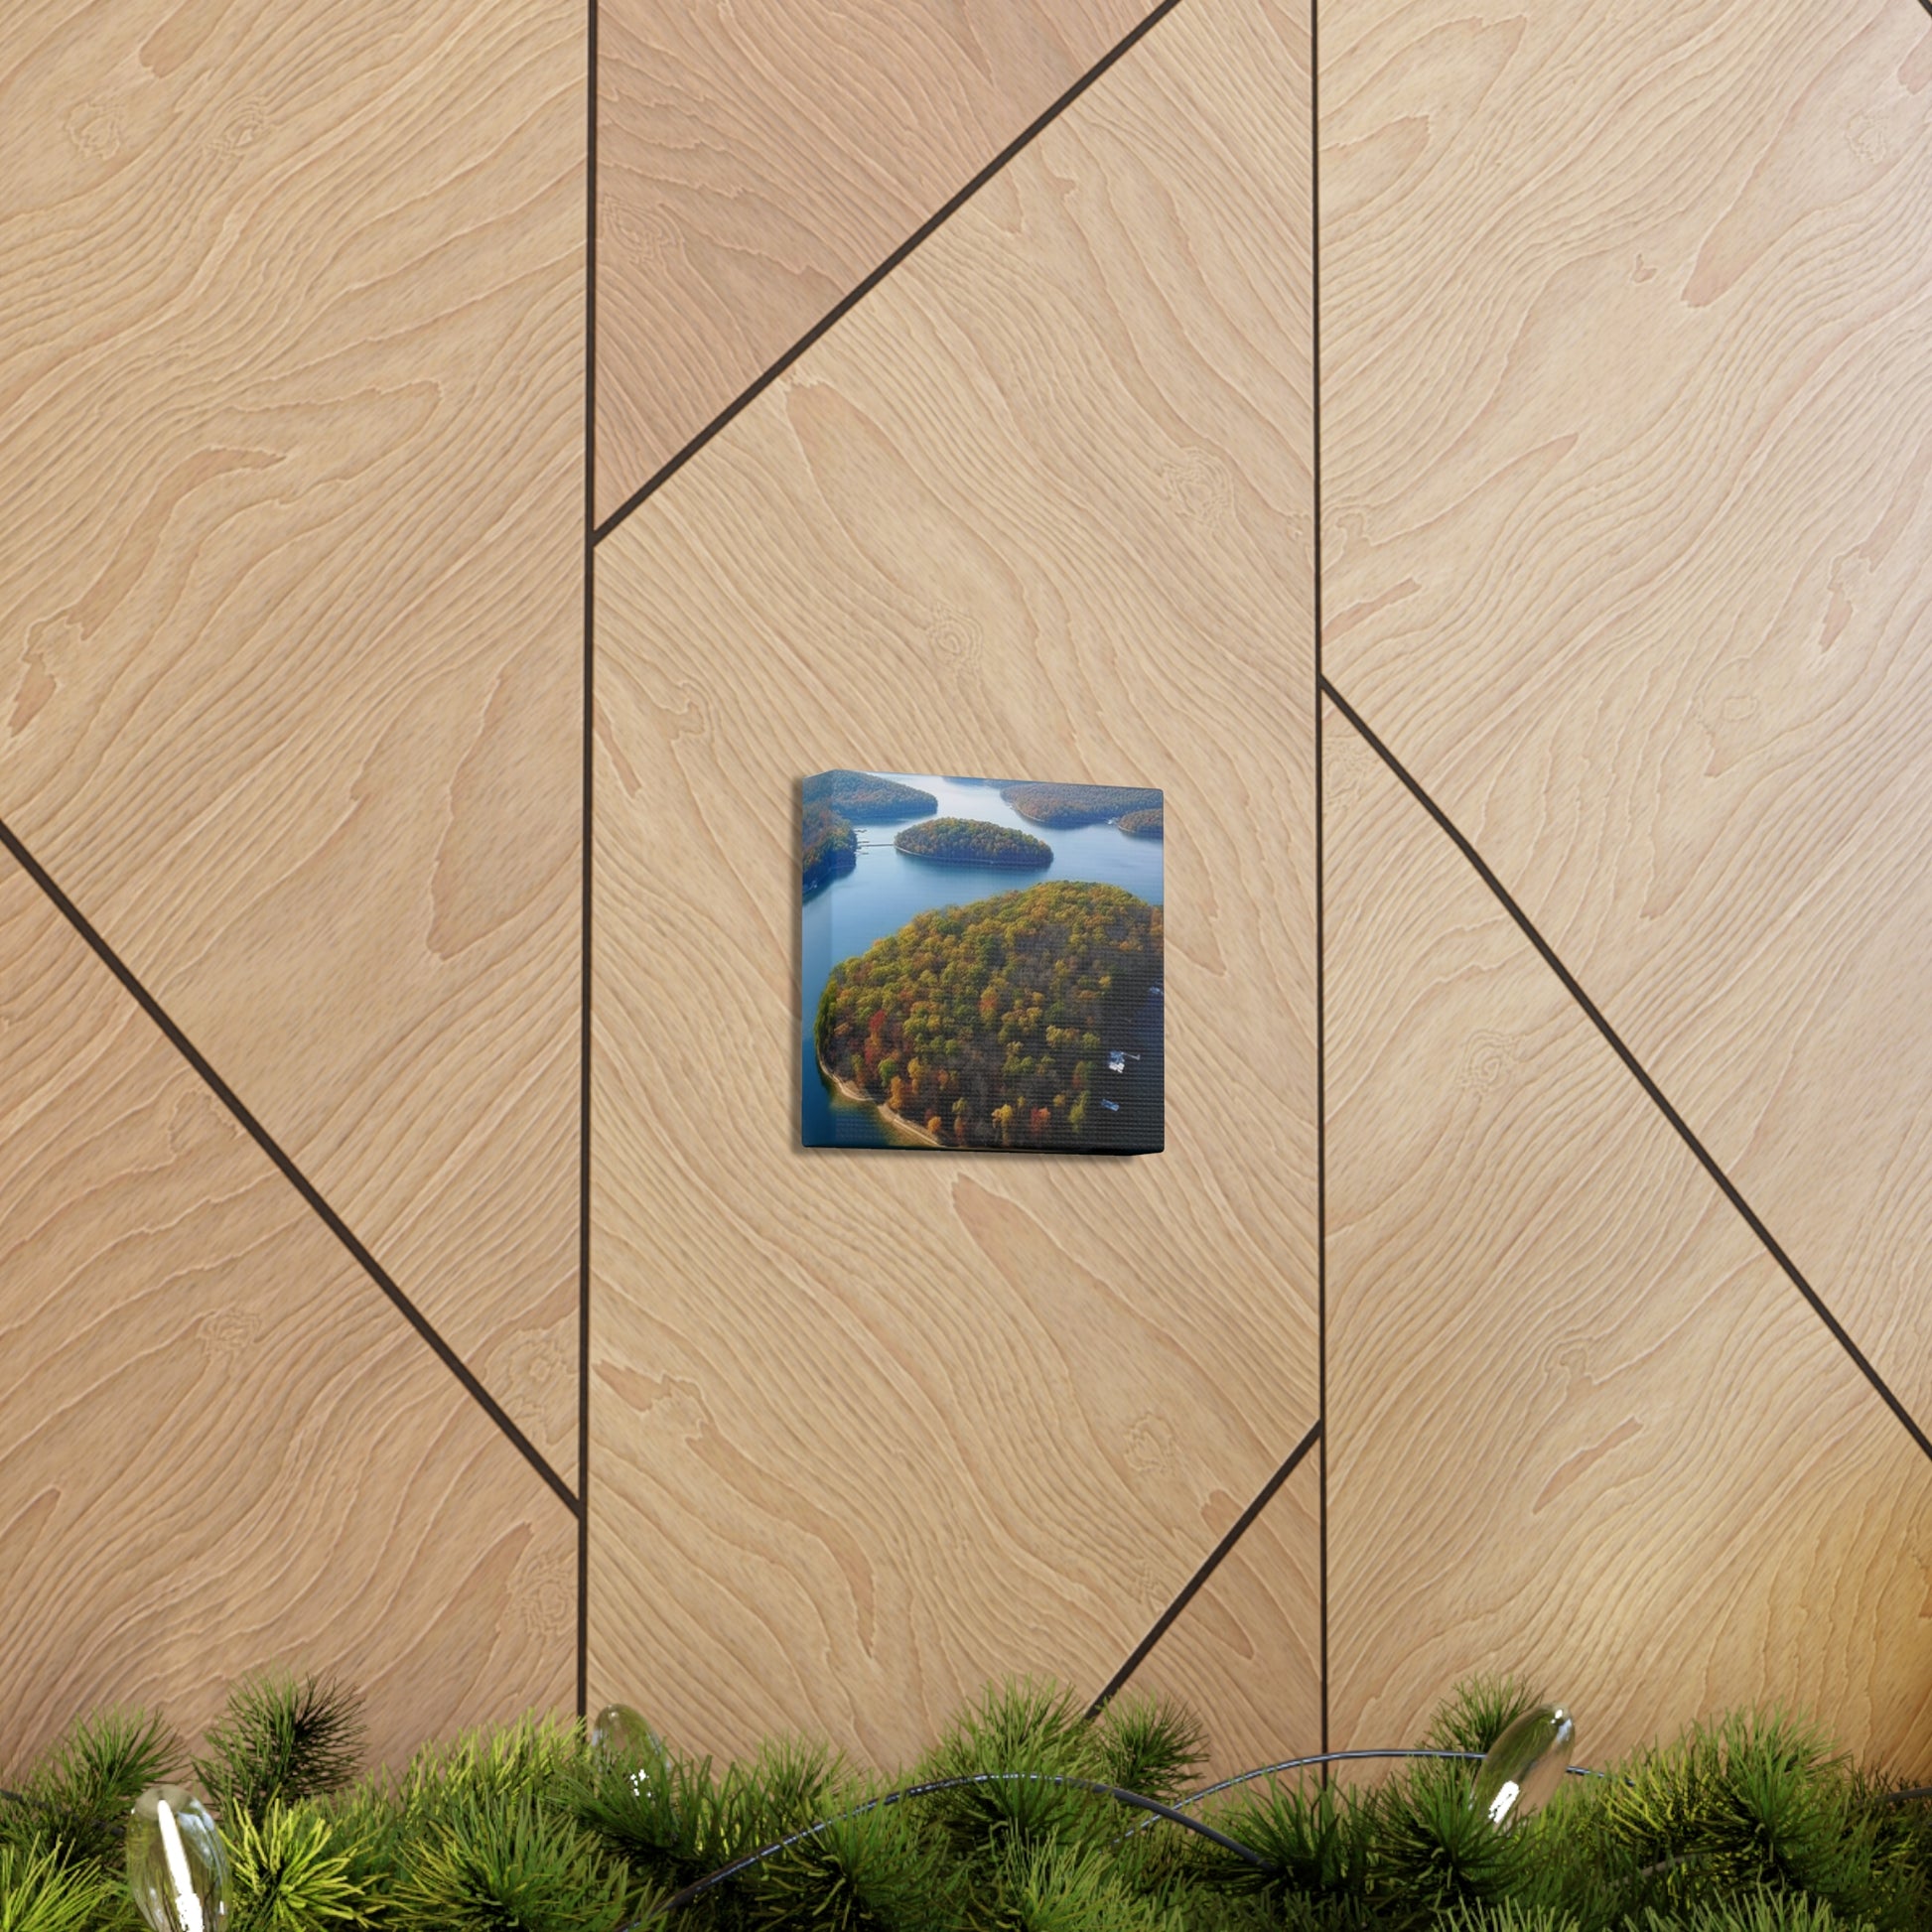 "Lake Of The Ozarks" Photo Canvas Wall Art - Weave Got Gifts - Unique Gifts You Won’t Find Anywhere Else!